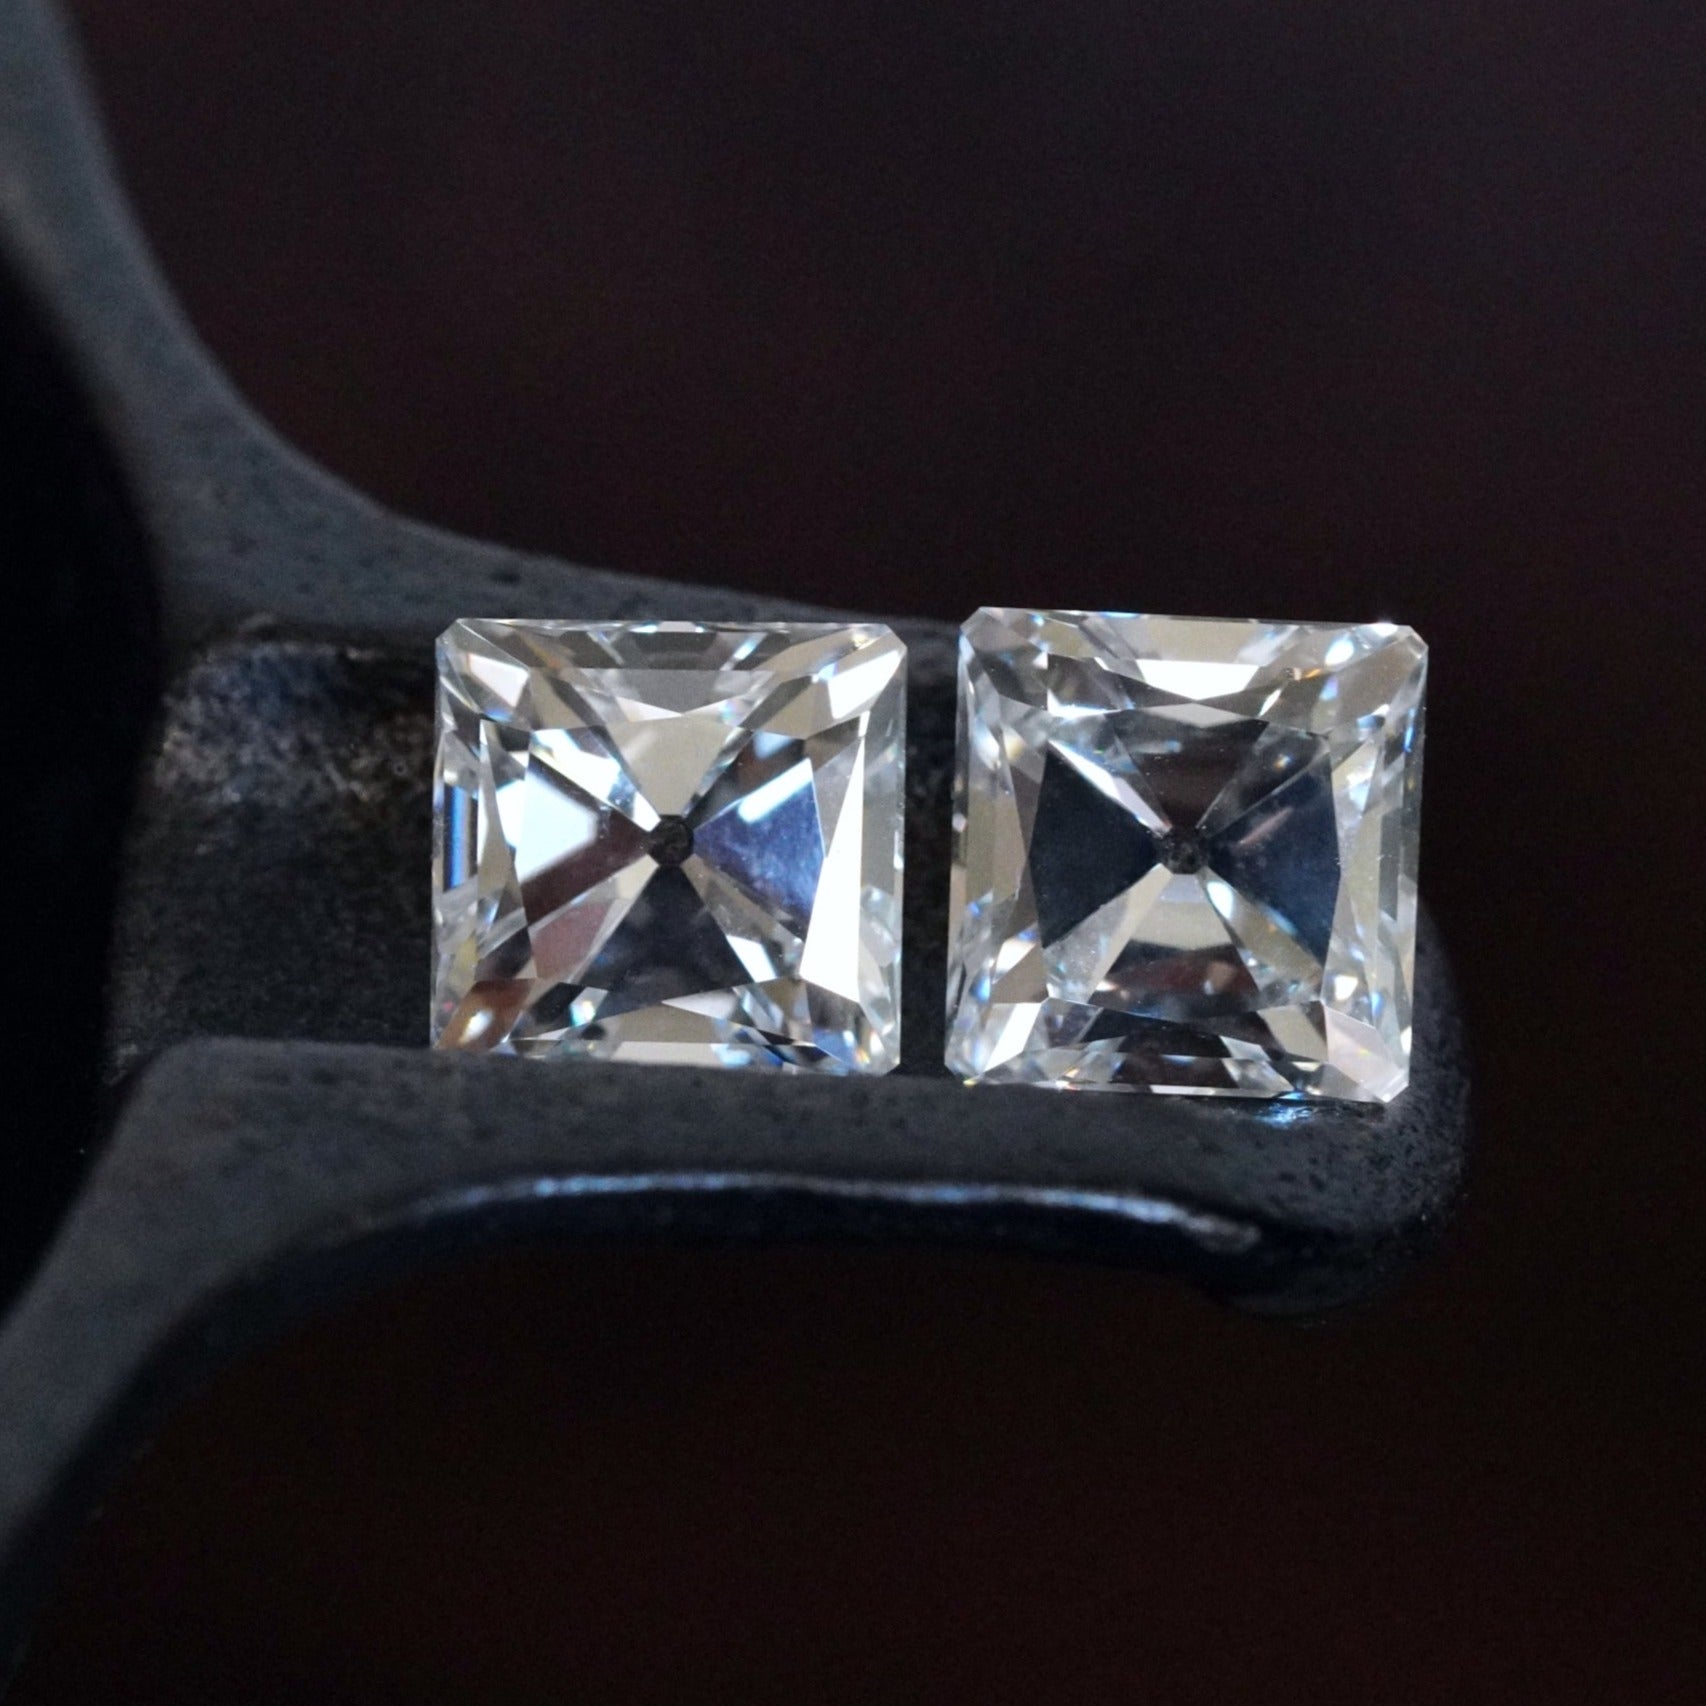 Pair of 3.11-Carat French Cut Diamonds: Elegance Redefined